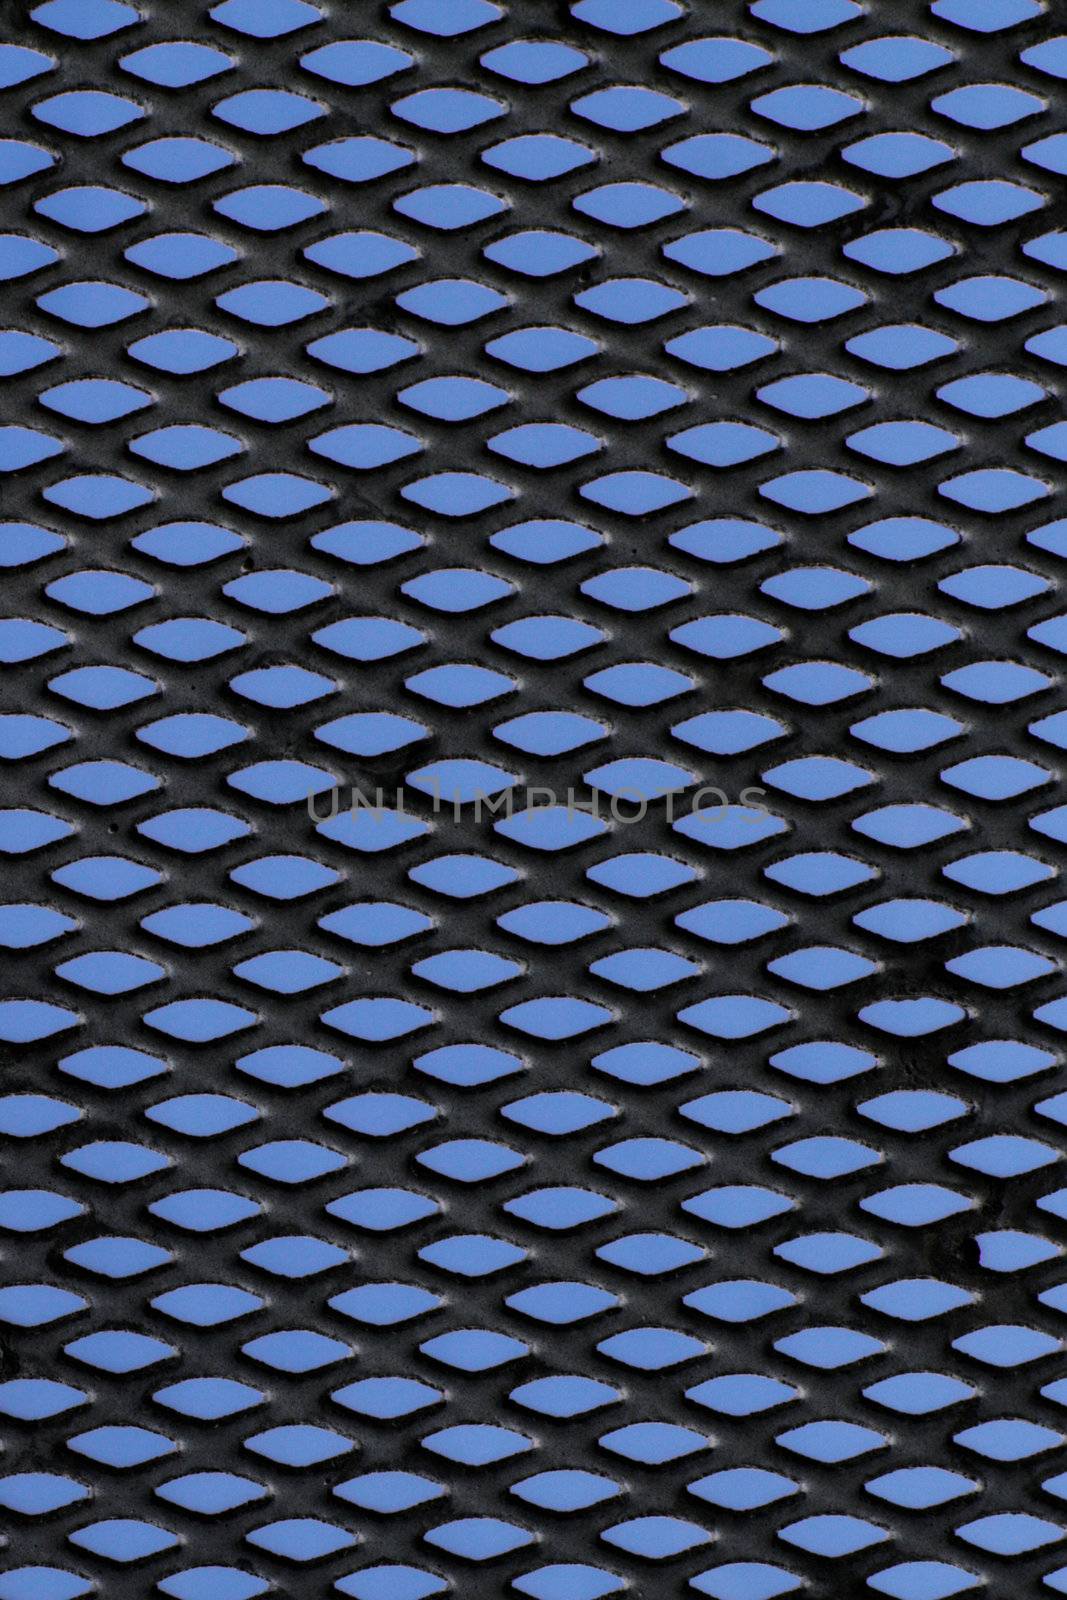 Metal grid over blue background by pulen